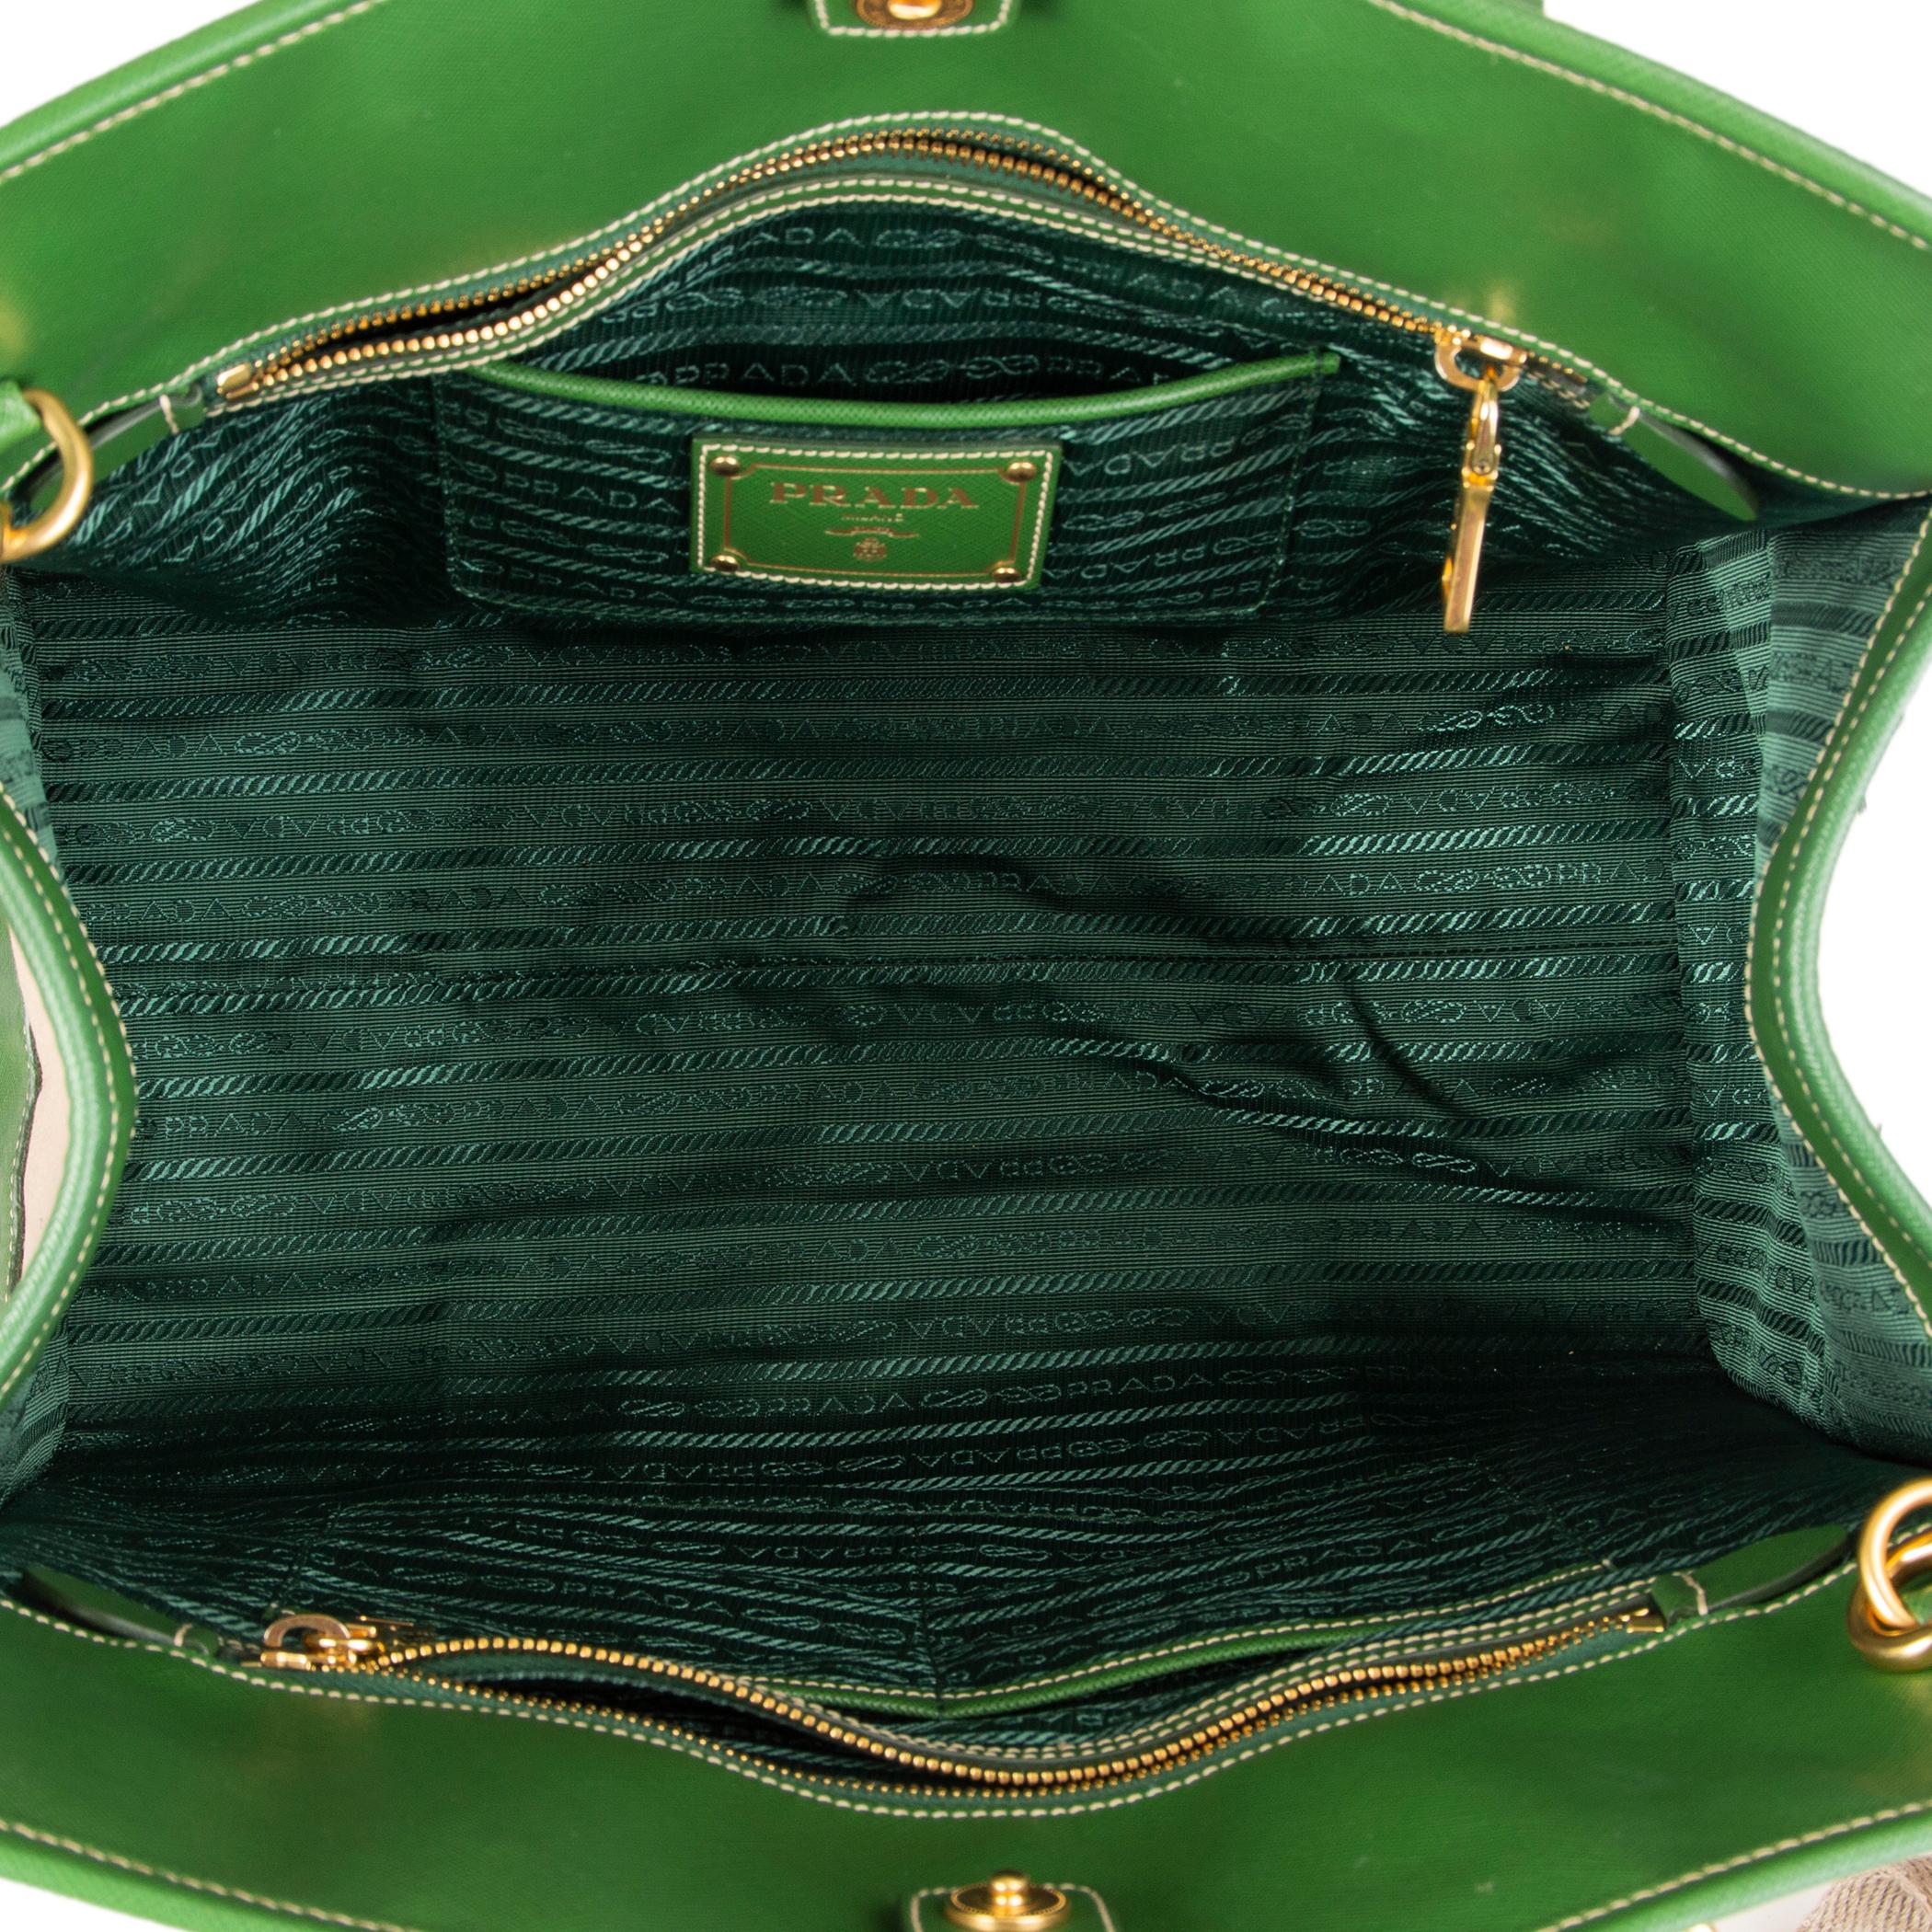 PRADA green leather & canvas NORTT TO SOUTH Tote Bag 1